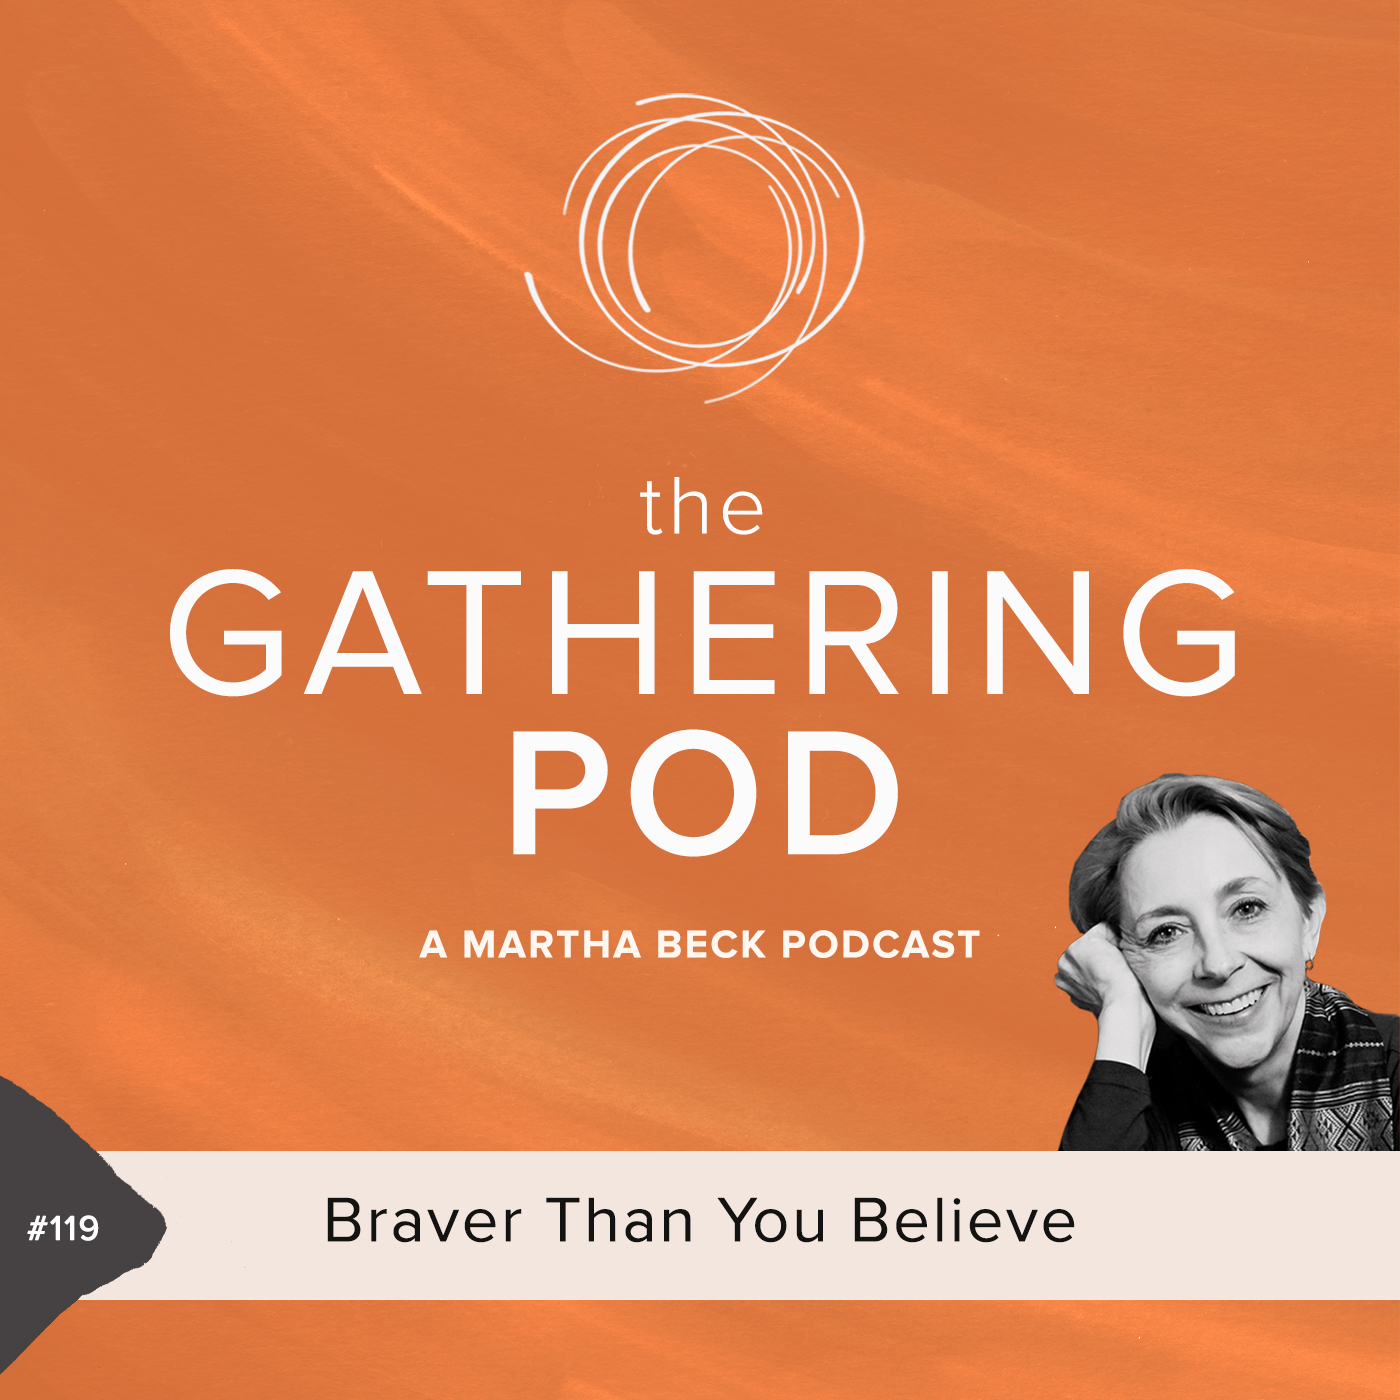 Image for The Gathering Pod A Martha Beck Podcast Episode #119 Braver Than You Believe